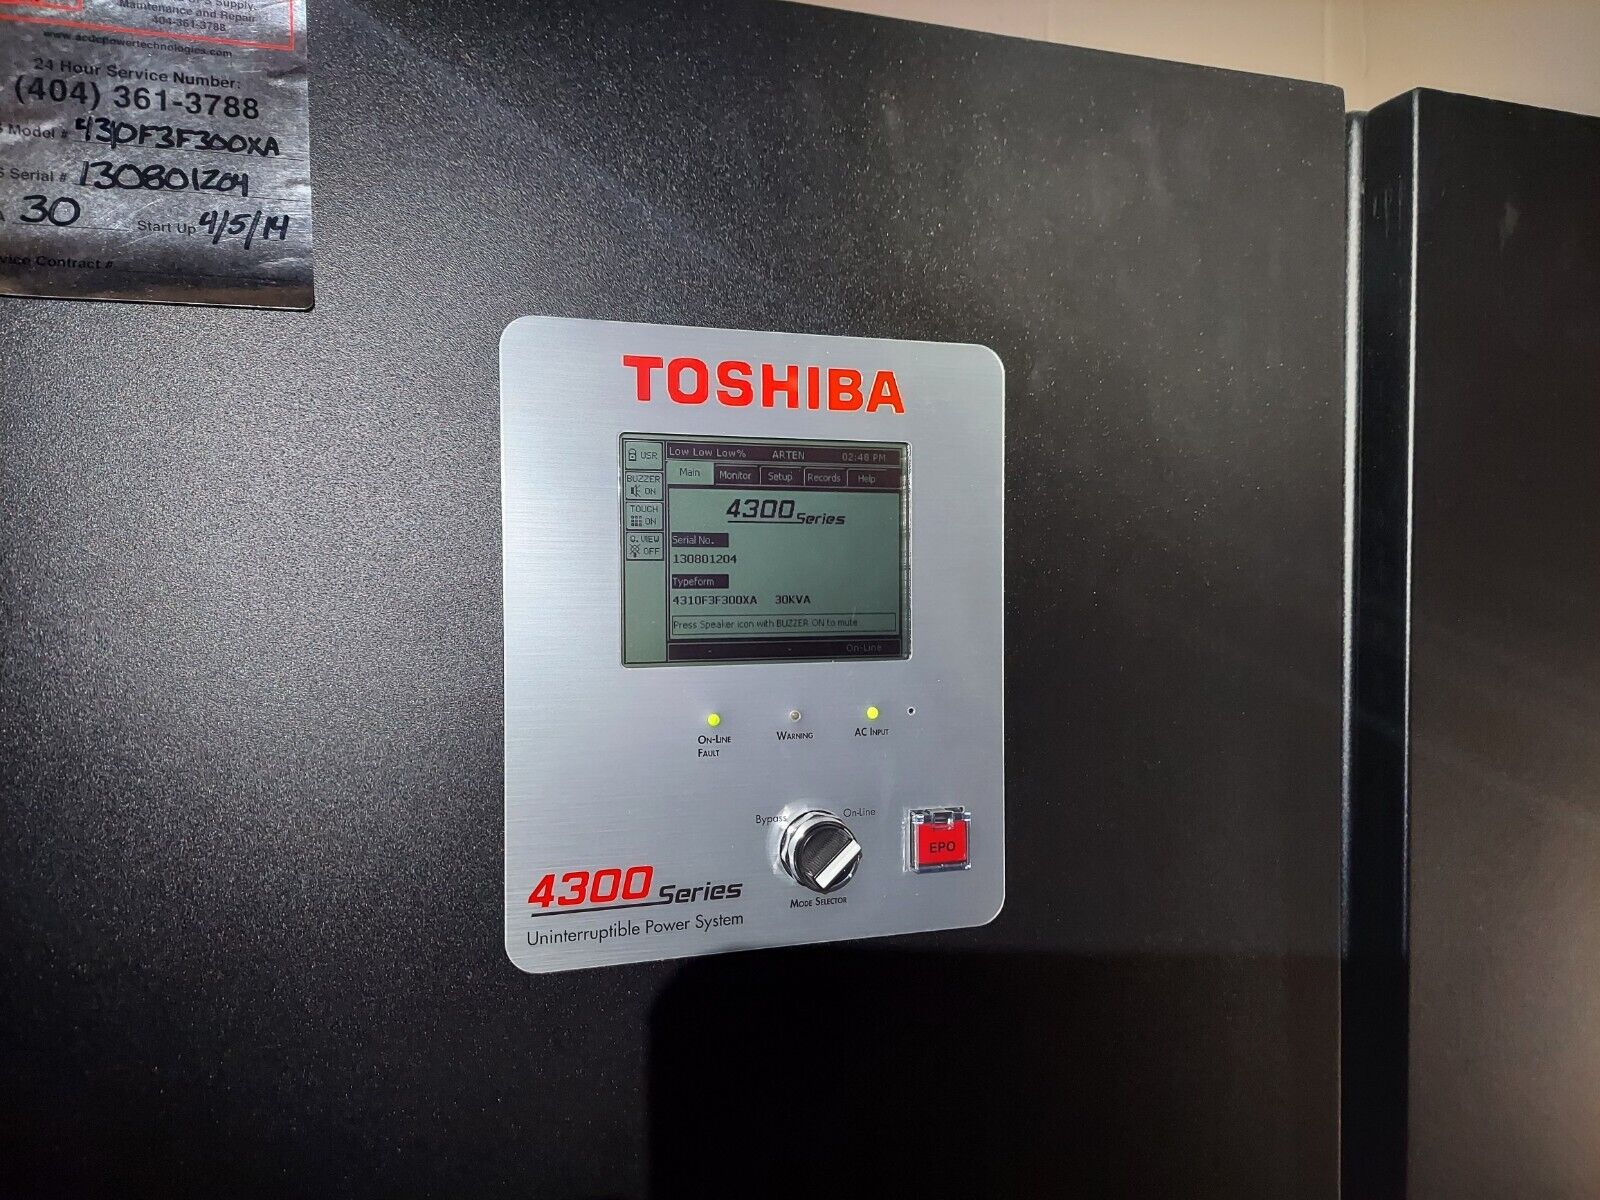 Toshiba 4300 Series Industrial Ups System With Batteries And All Accessories